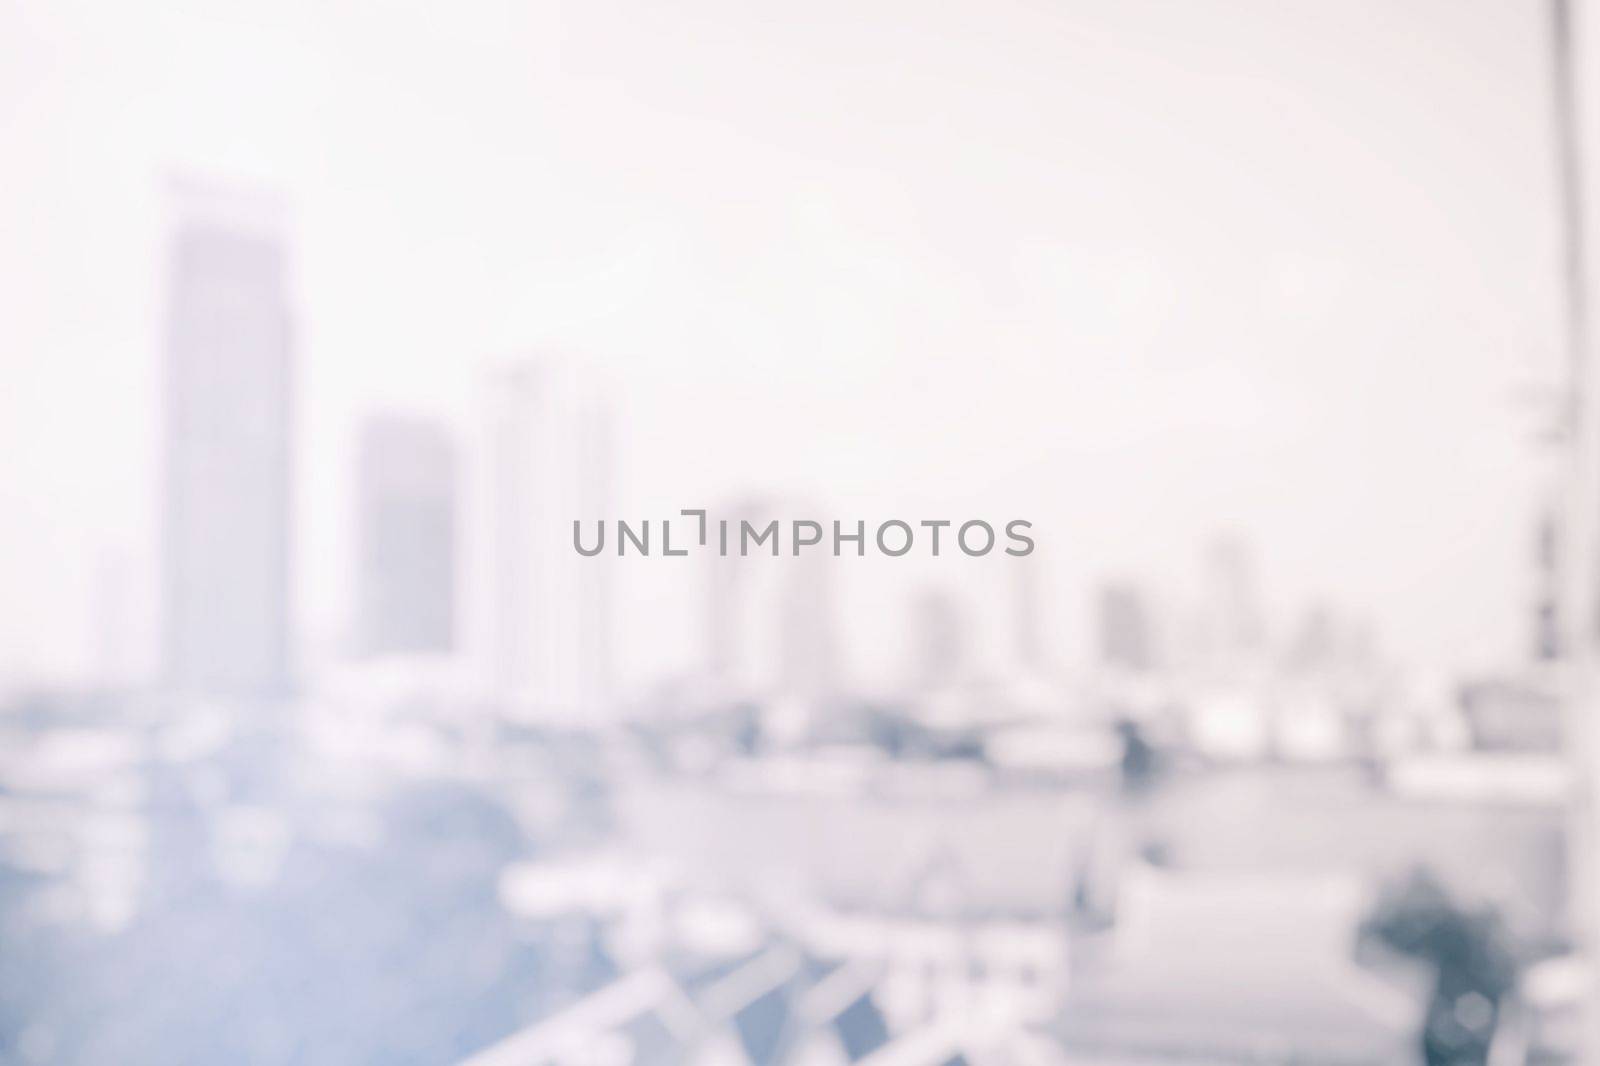 Blurred Black and White Cityscape Background. by mesamong